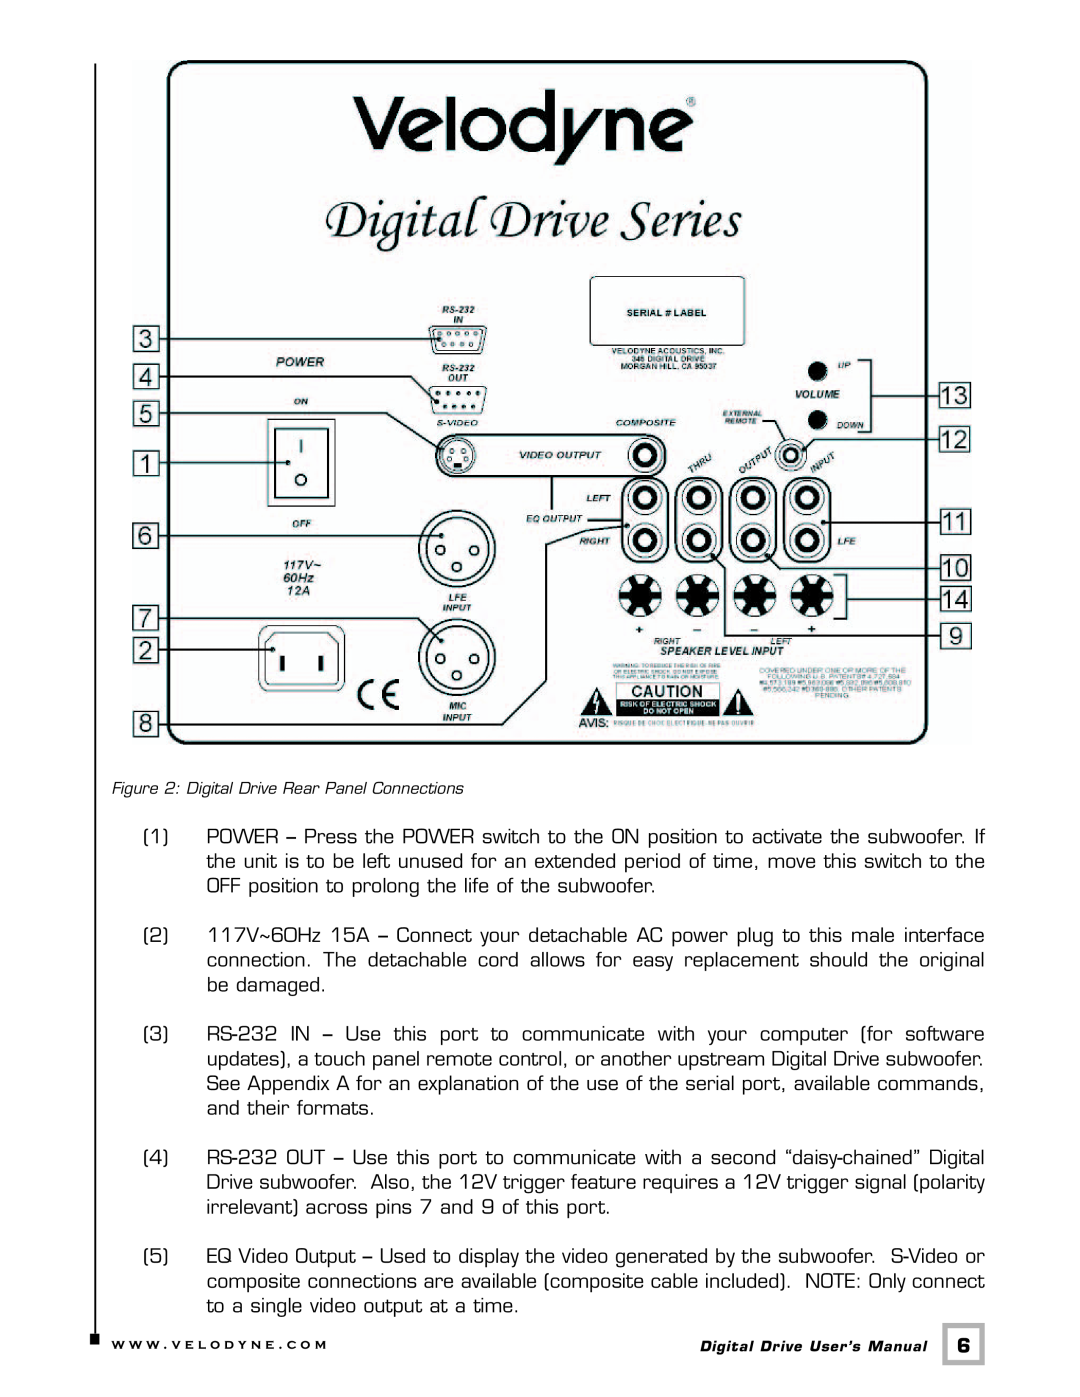 Velodyne Acoustics Digital Drive user manual to a single video output at a time 